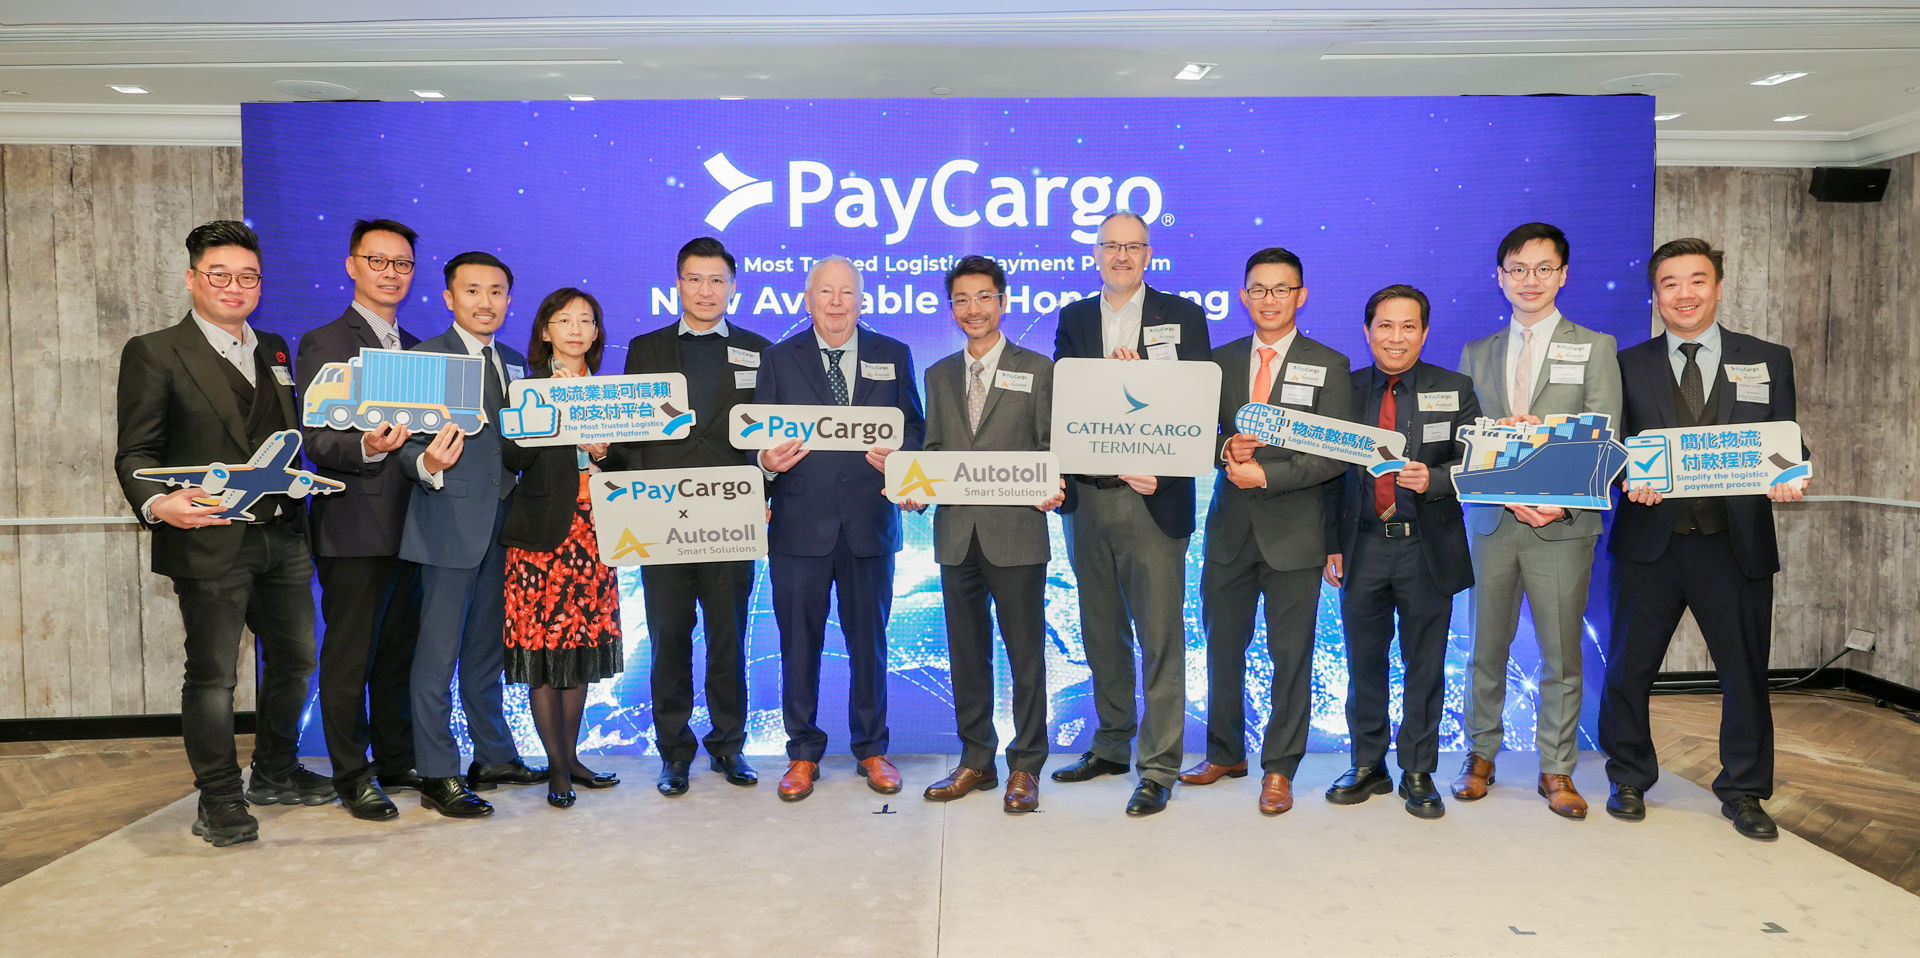 (From left) Senior Business Advisor of PayCargo Continental Asia Limited Mr Ryan Ngan; the General Manager of IoT & Telematics of Autotoll International Limited, Mr Owen Leung; the Commercial Director, Asia of PayCargo Continental Asia Limited, Mr Morgan Law; the Deputy Head of Financial Services & Fintech of InvestHK, Ms Karen Mak; Legislative Council Member (Functional Constituency - Technology and Innovation) Mr Duncan Chiu; the Chief Executive Officer of PayCargo International, Mr Adrie Reinders; the Deputy Chief Executive Officer of Autotoll International Limited, Mr Karel Au; the Chief Operating Officer of Cathay Cargo Terminal, Mr Mark Watts; the General Manager, Australia of PayCargo, Mr Alvan Aiau Yong; the General Manager of Dimerco Air Forwarders (H.K.) Limited, Mr Eddie Law; the Vice President (Fintech) of the Office for Attracting Strategic Enterprises, Mr Max Lau; and Marketing and Communications Manager of Autotoll International Limited Mr Henry Yau 

